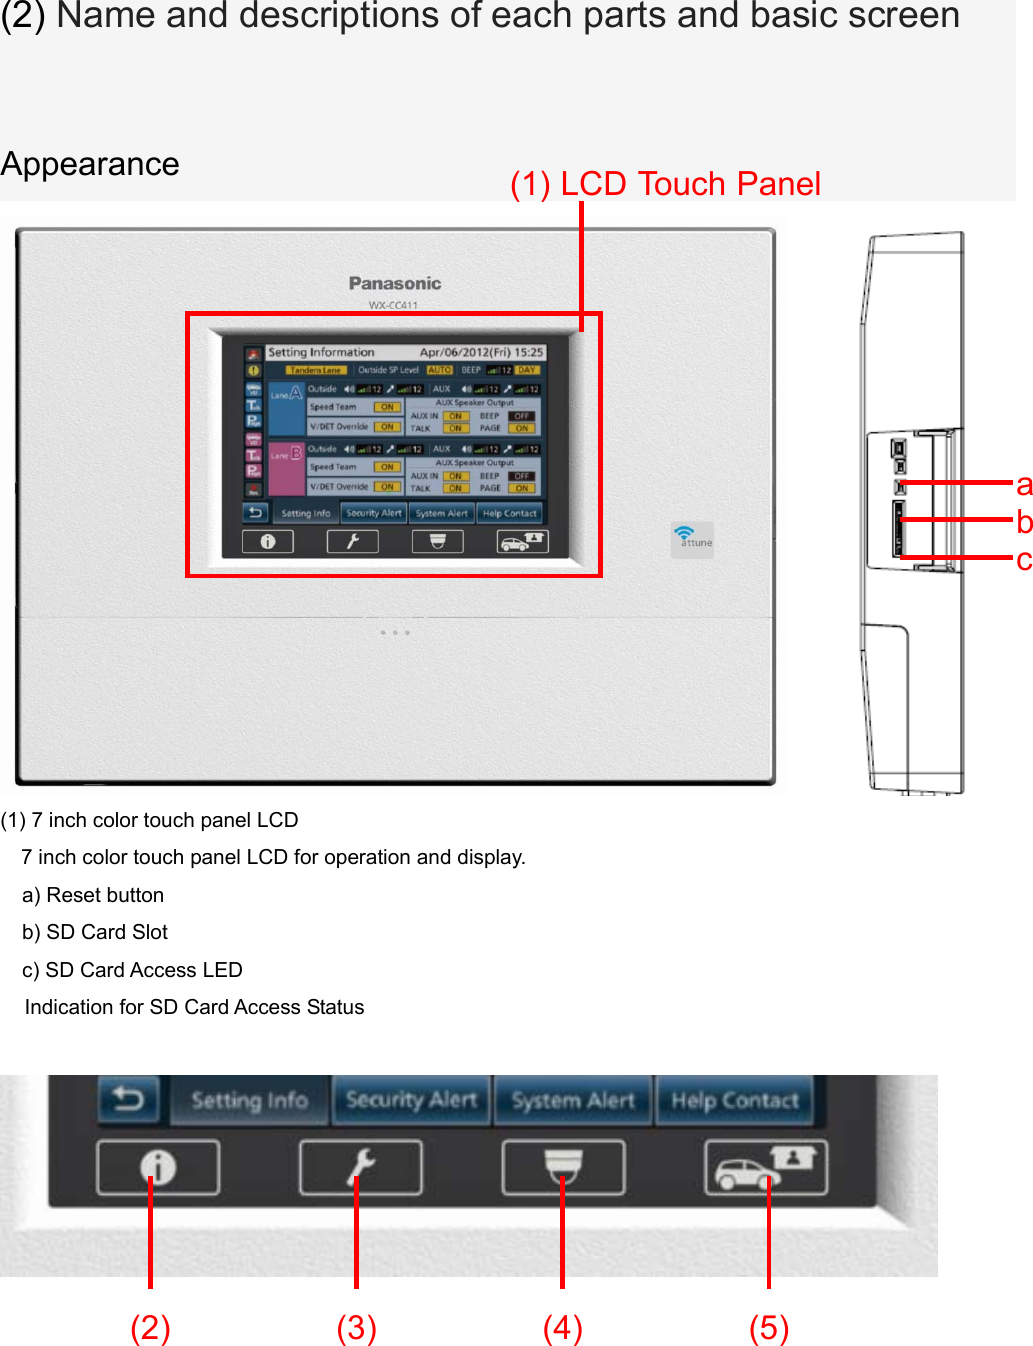  (2) Name and descriptions of each parts and basic screen  Appearance     a b c (1) LCD Touch Panel(1) 7 inch color touch panel LCD 7 inch color touch panel LCD for operation and display. a) Reset button b) SD Card Slot c) SD Card Access LED    Indication for SD Card Access Status   (3)  (4) (5)  (2)  